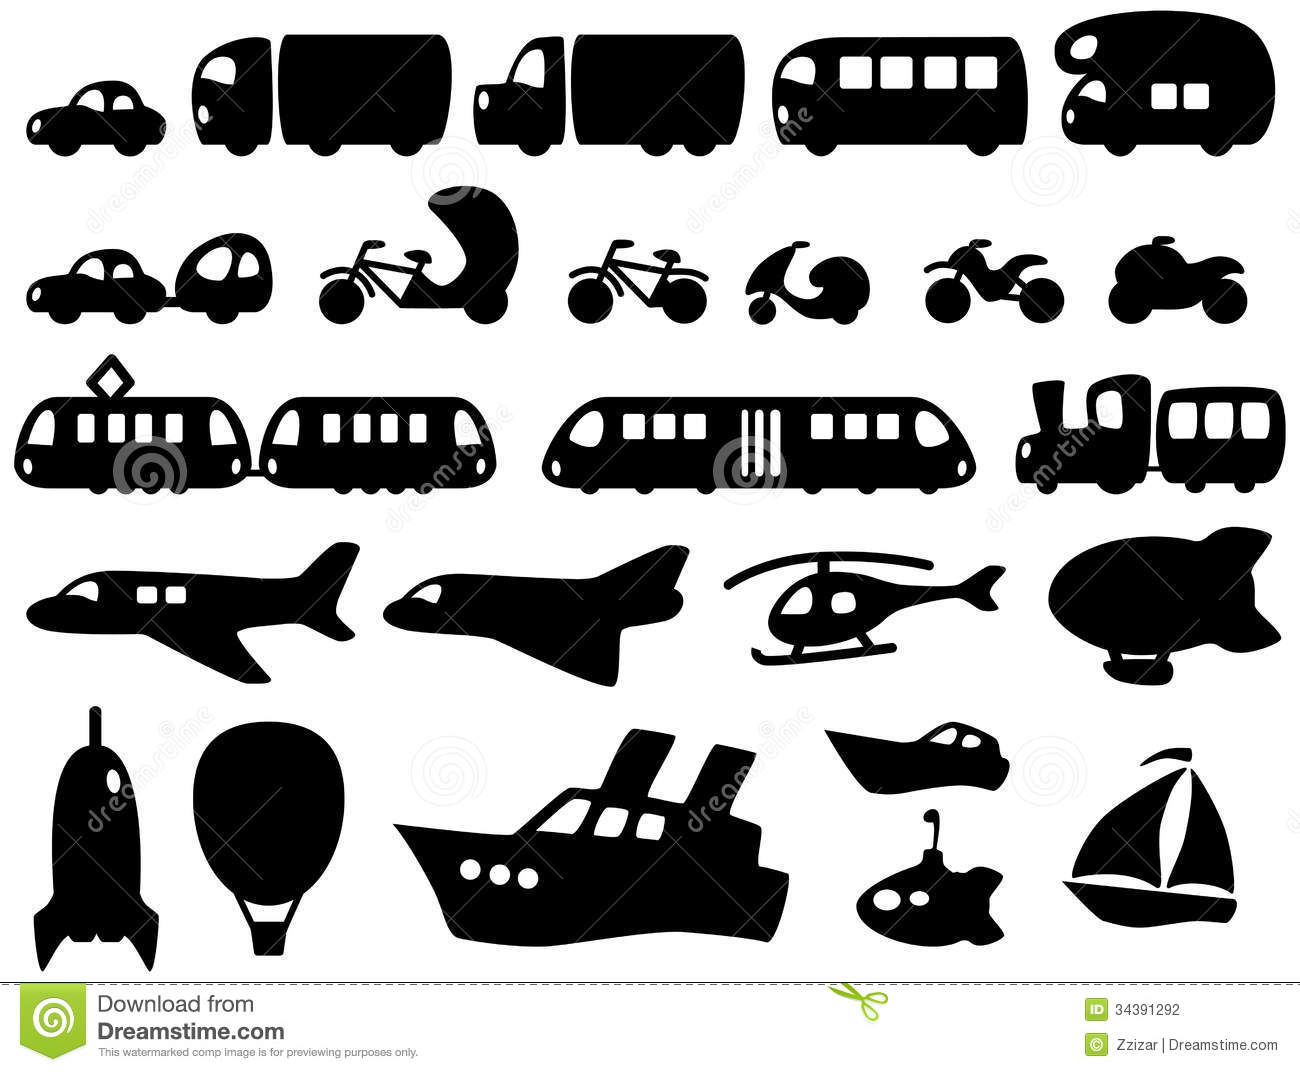 Set Of Cute Transportation Icons  Includes The Most Common And Some